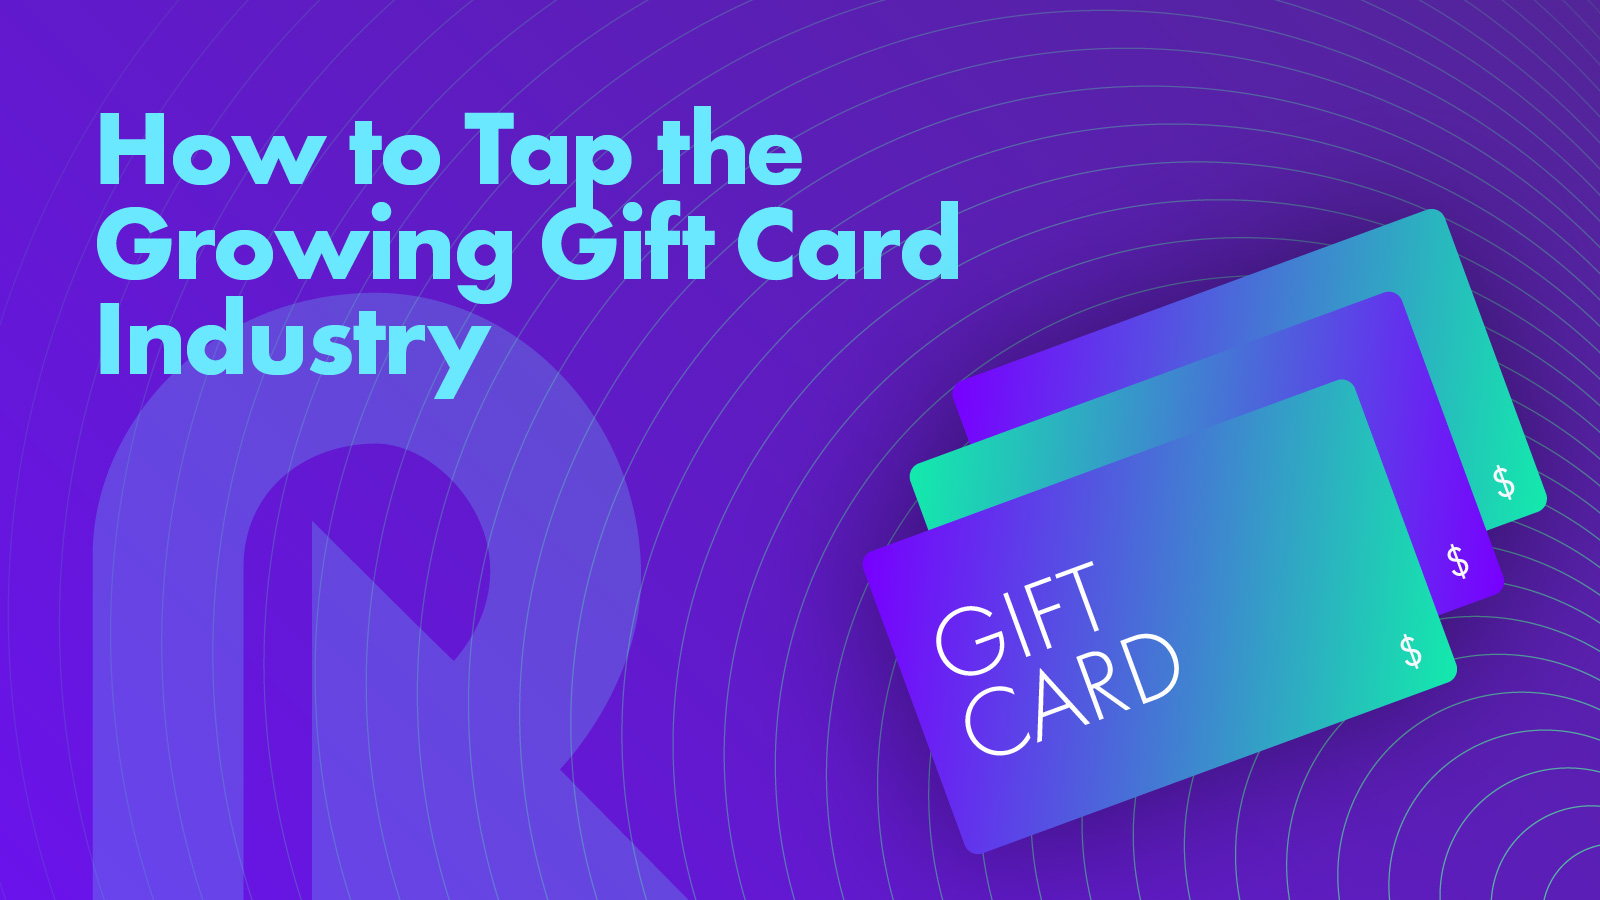 Top 7 Most Popular Gift Card Types In Australia - Cardtonic